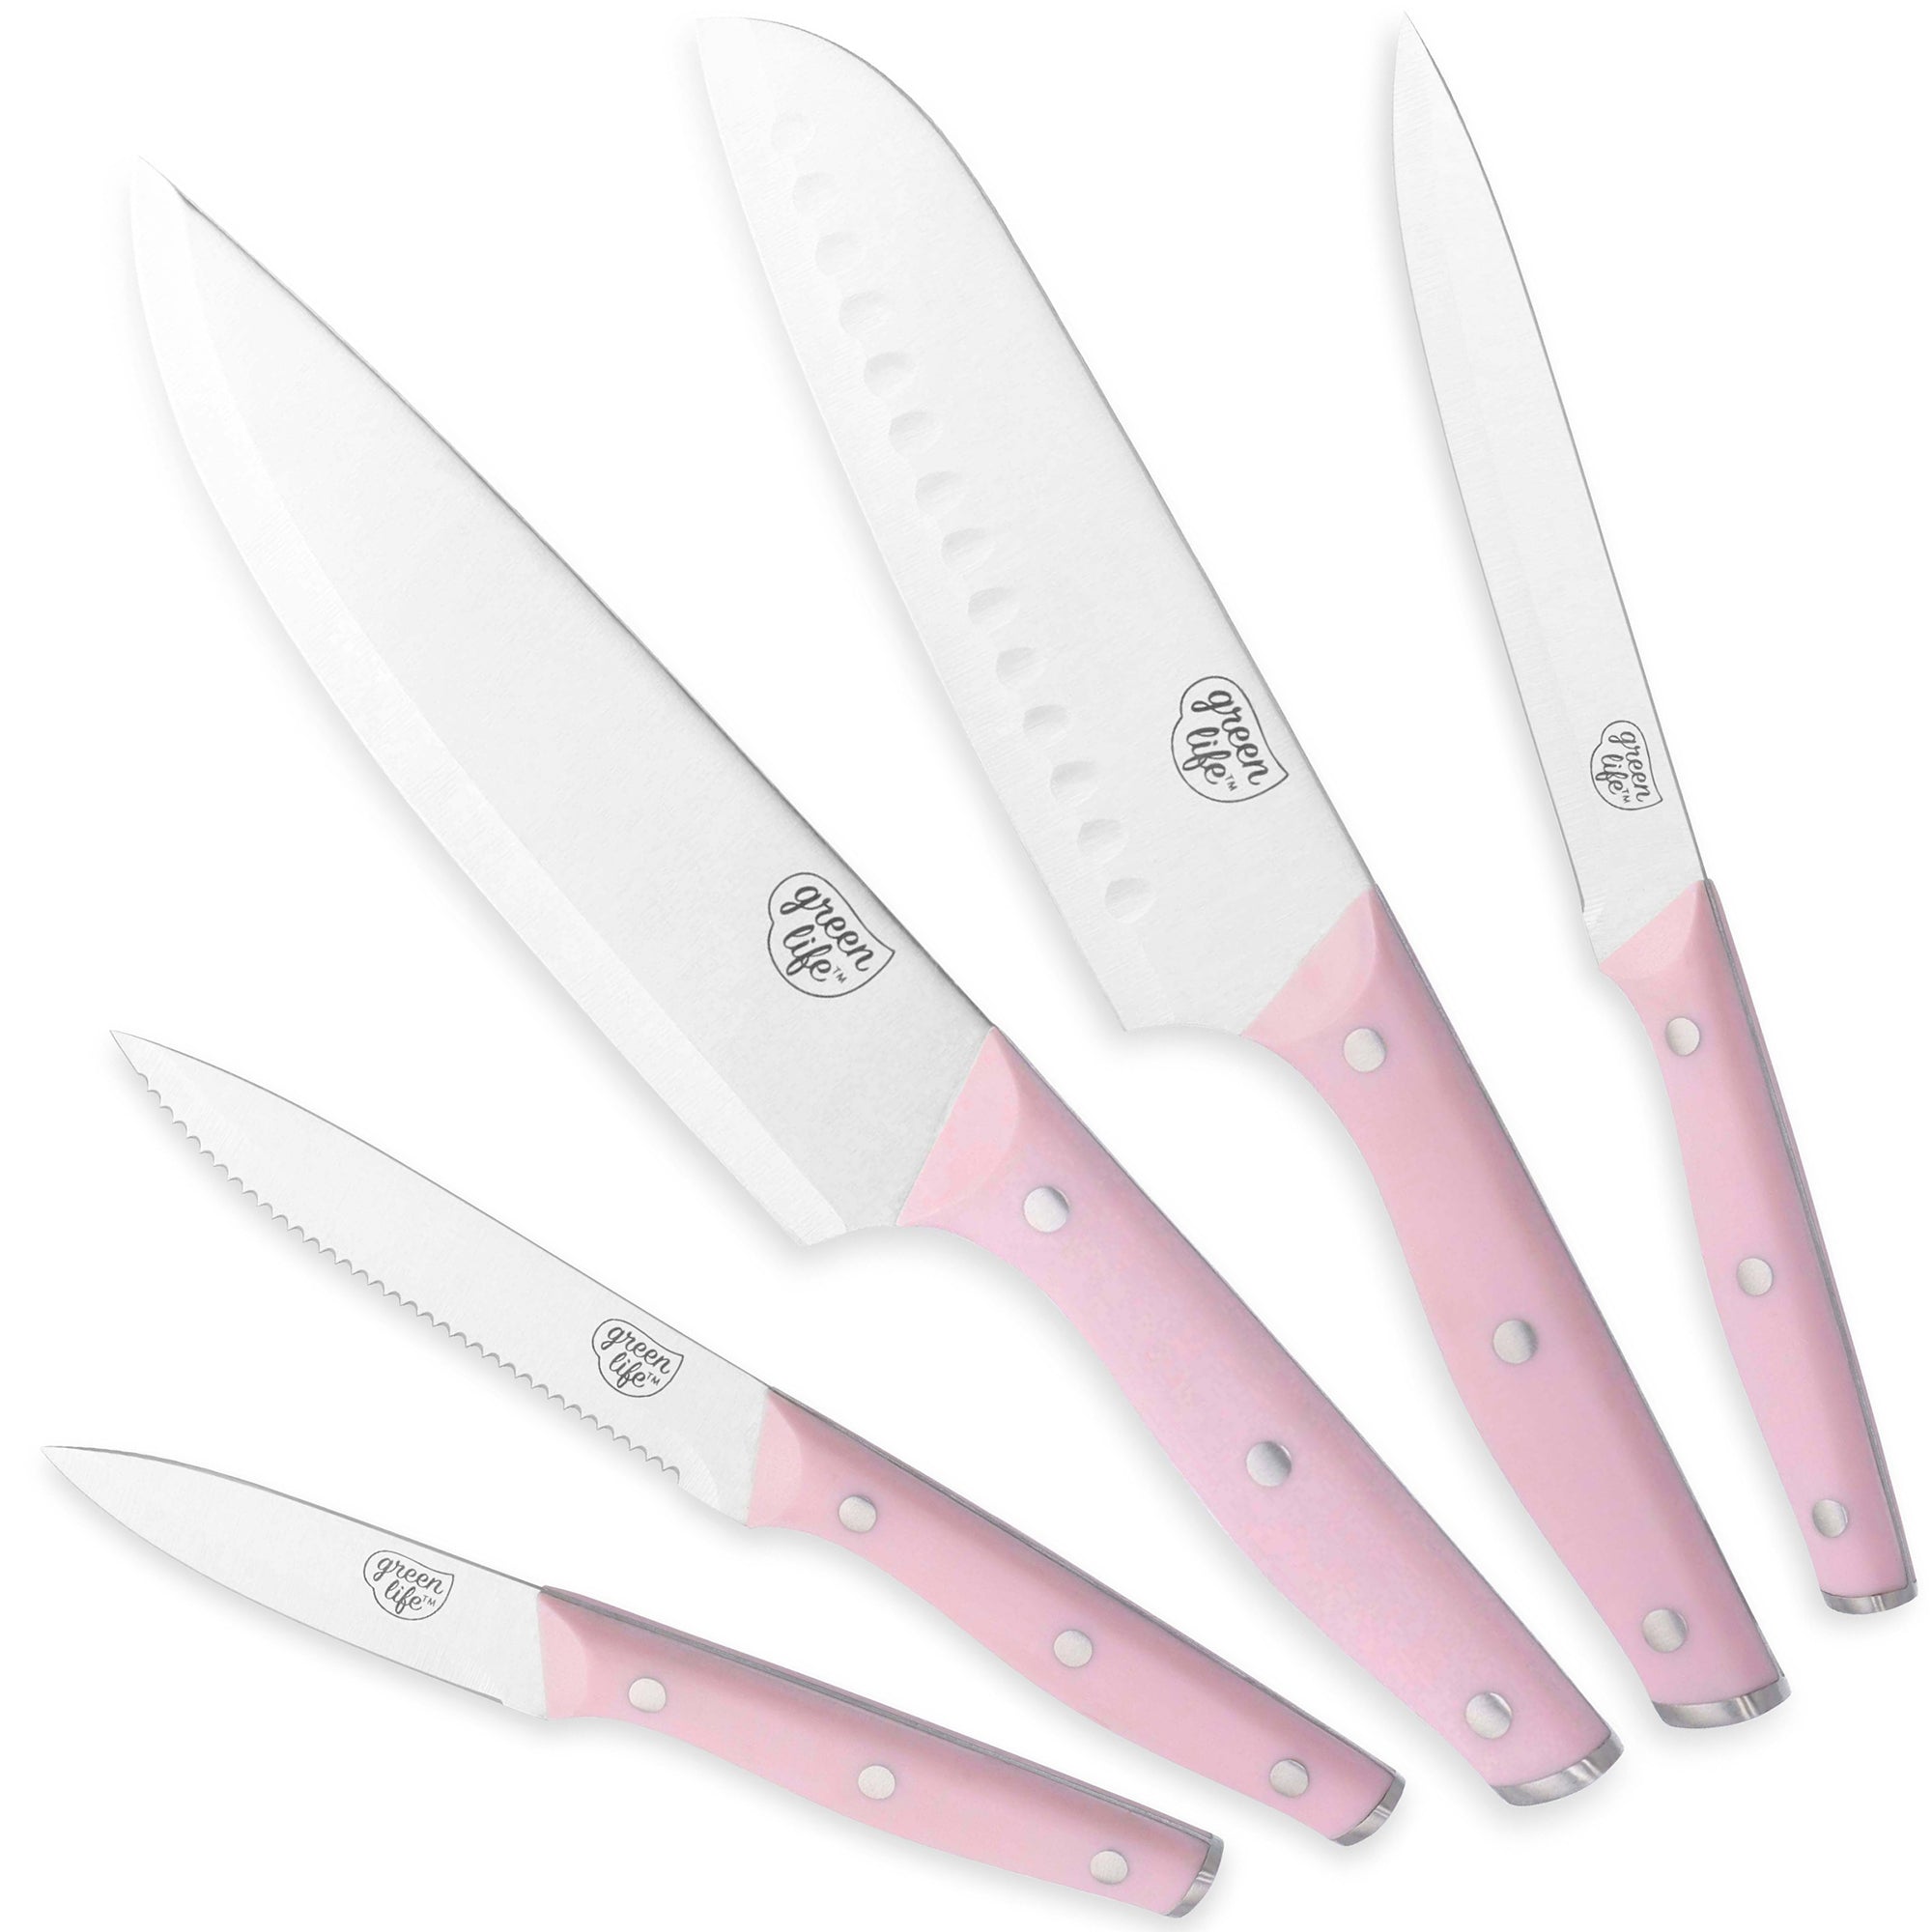 GreenLife Stainless Steel 5-Piece Cutlery Set, Pink